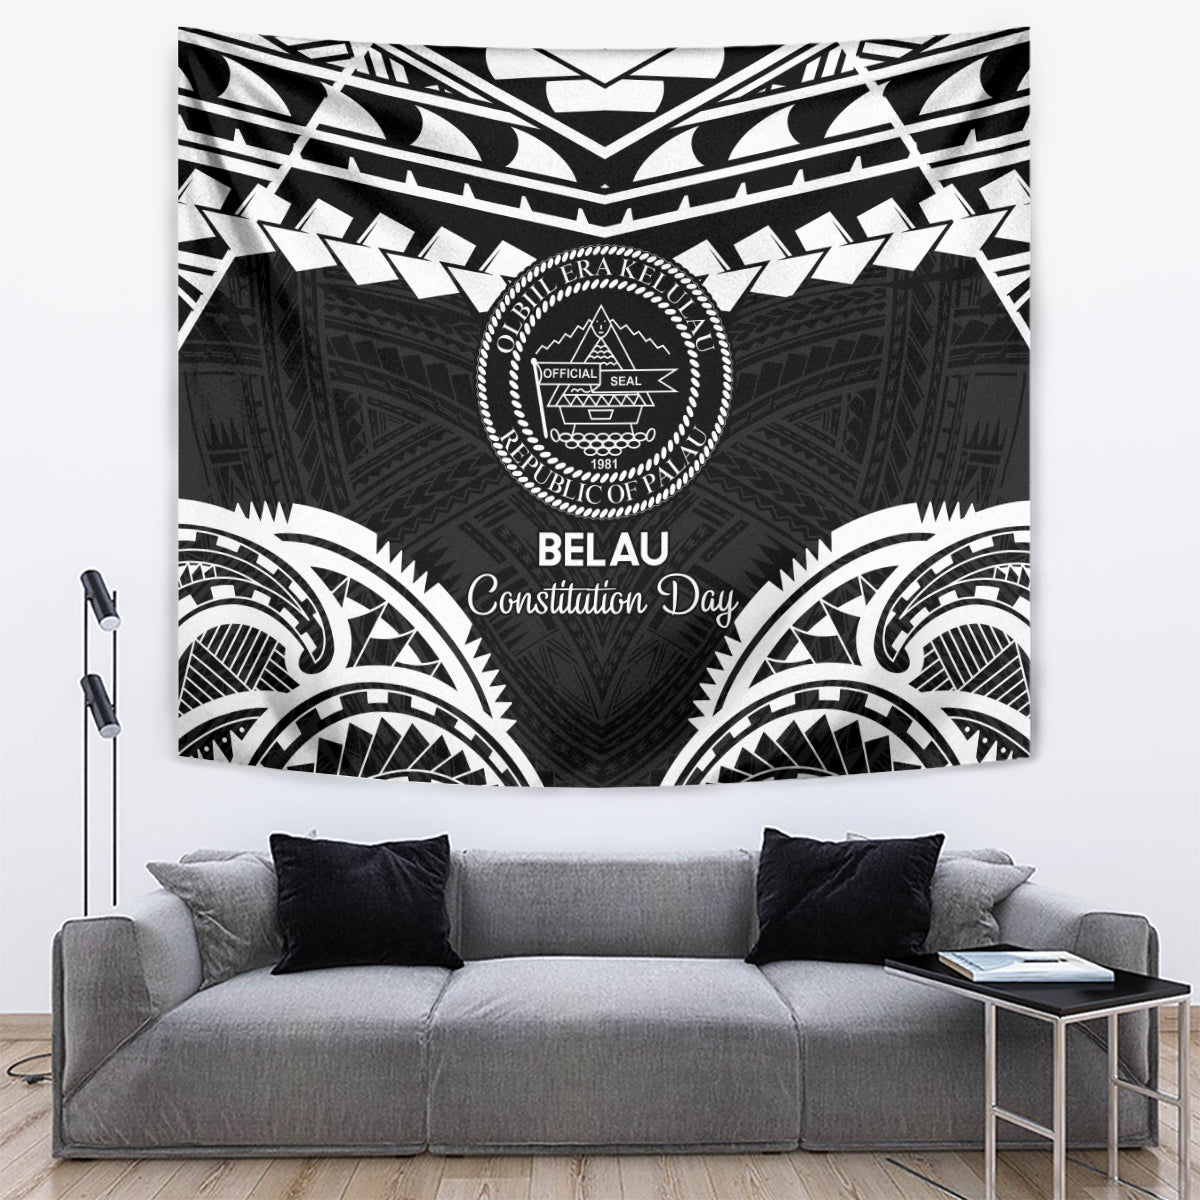 Palau Constitution Day Tapestry Belau Seal With Polynesian Pattern - Black